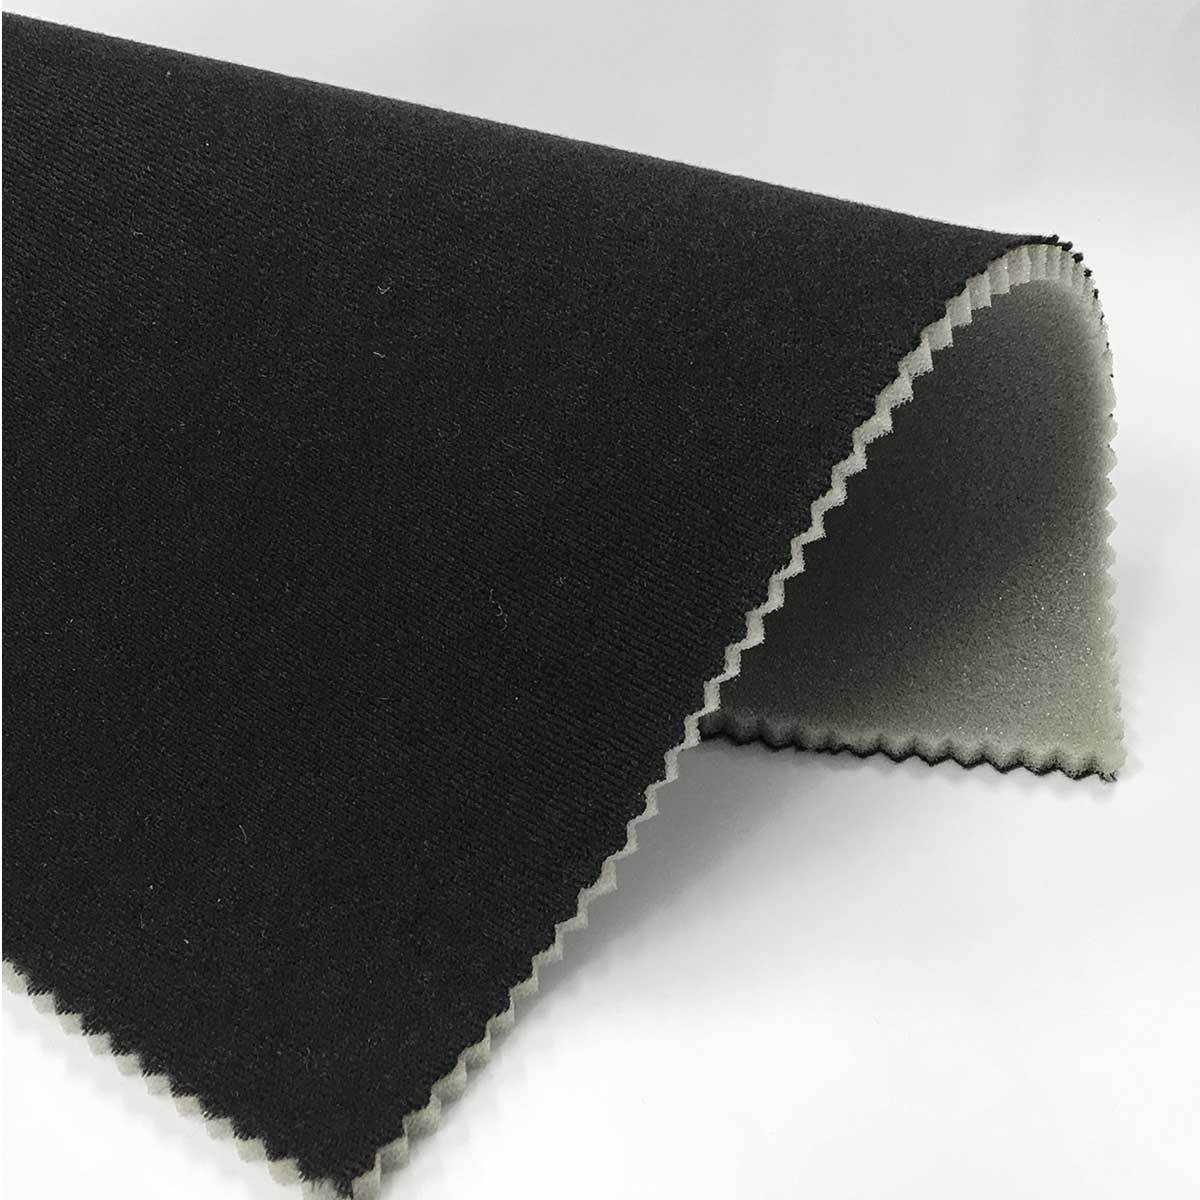 [CI] fireproof automobile ceiling . for urethane foam [ black ][ thickness 5mm][ width 150cm] ceiling sause - ceiling ..- trim re-covering - slack - roof lining 